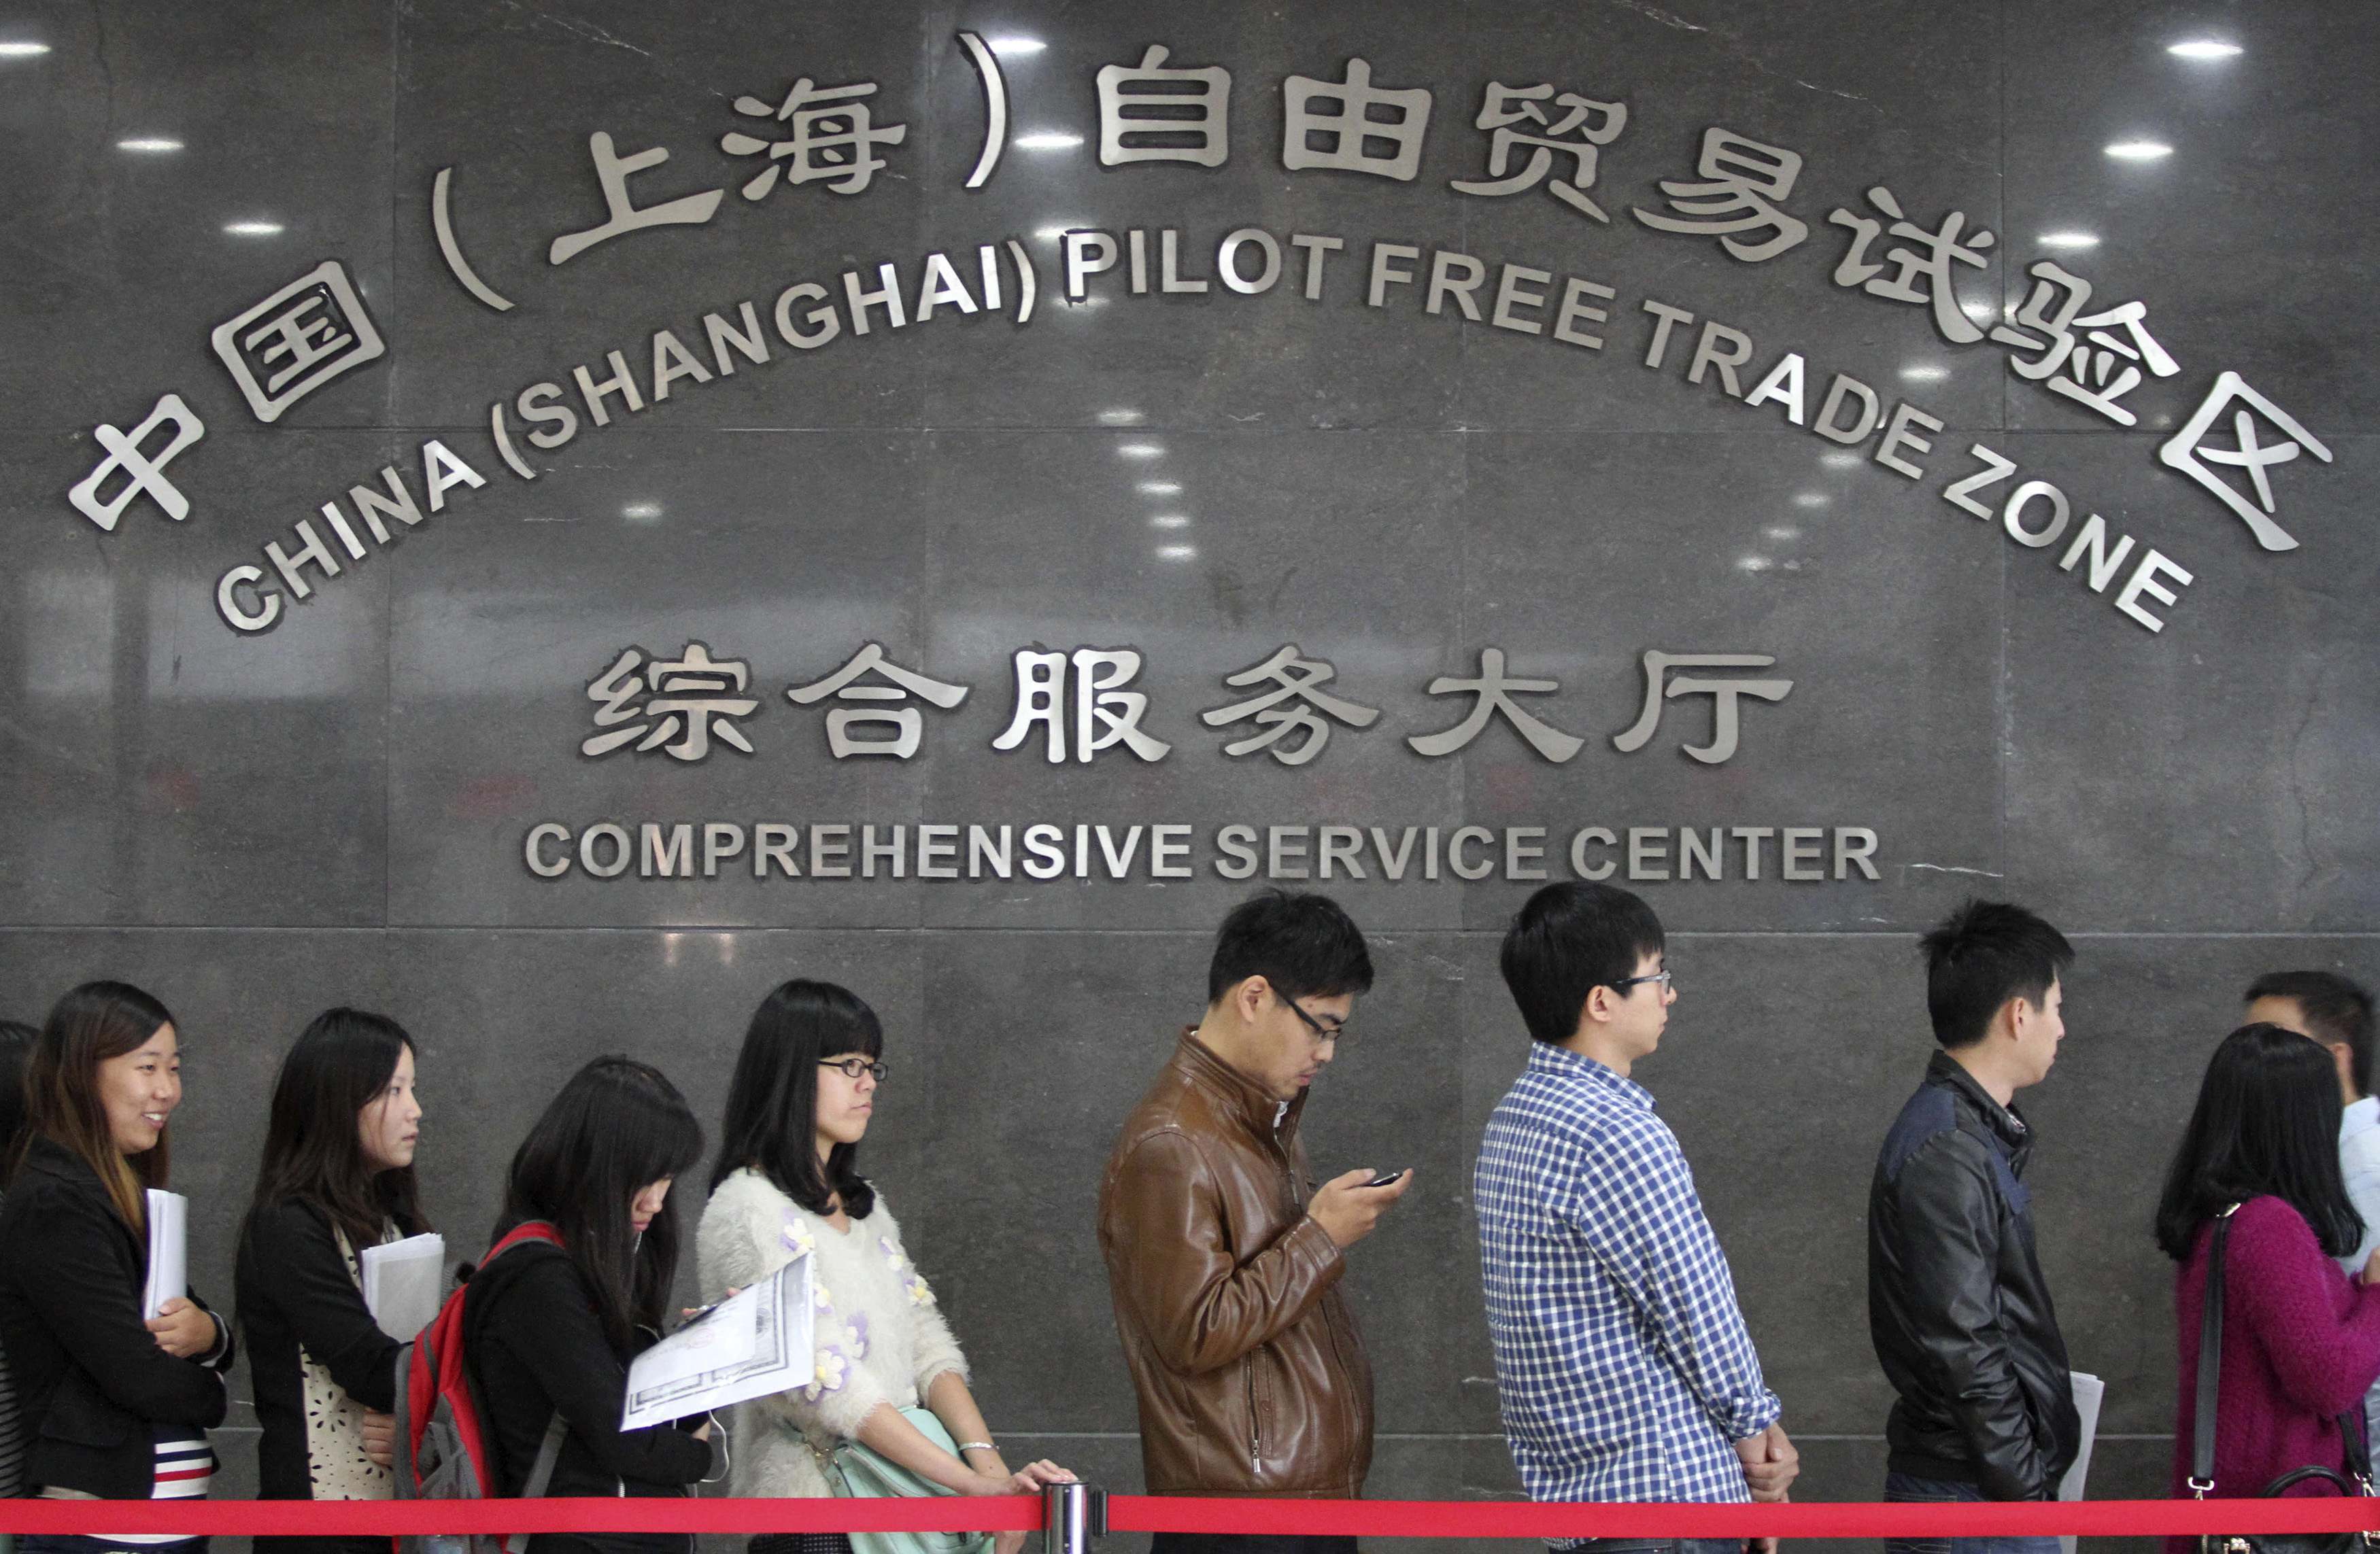 BOC Aviation is lobbying the Shanghai government to relax restrictions on offshore financing in the free-trade zone. Photo: Reuters